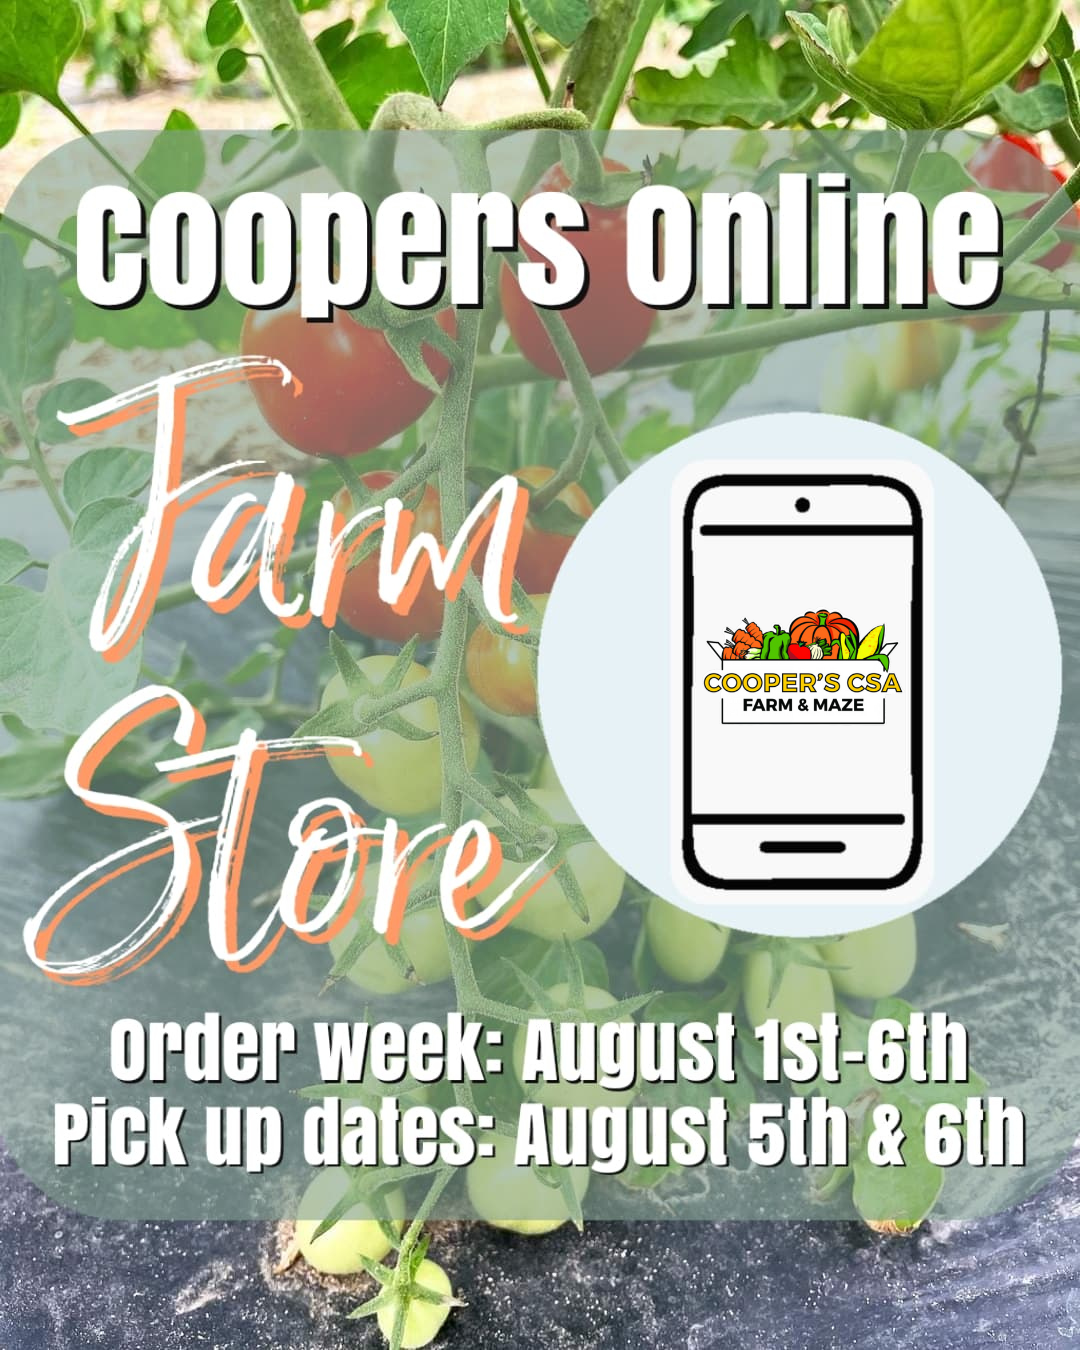 Next Happening: Coopers Online Farm Stand- August 1st-6th